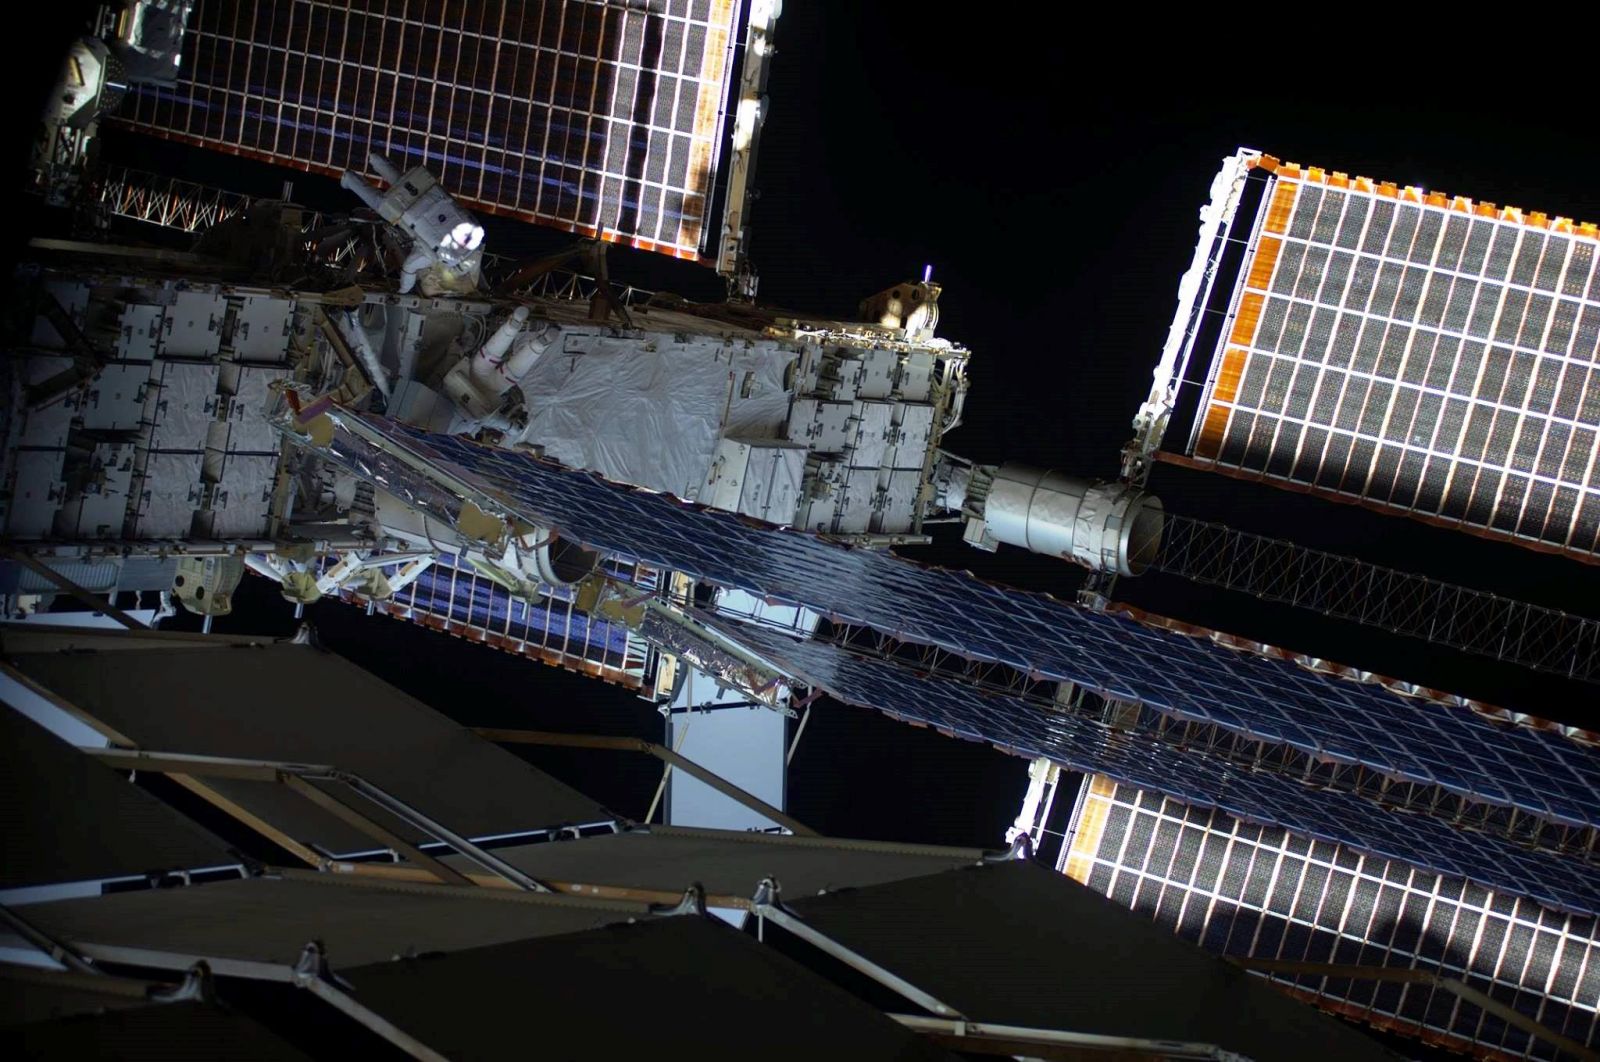 RemoveDEBRIS spacecrafts deploys from ISS towards its space junk clean-up mission